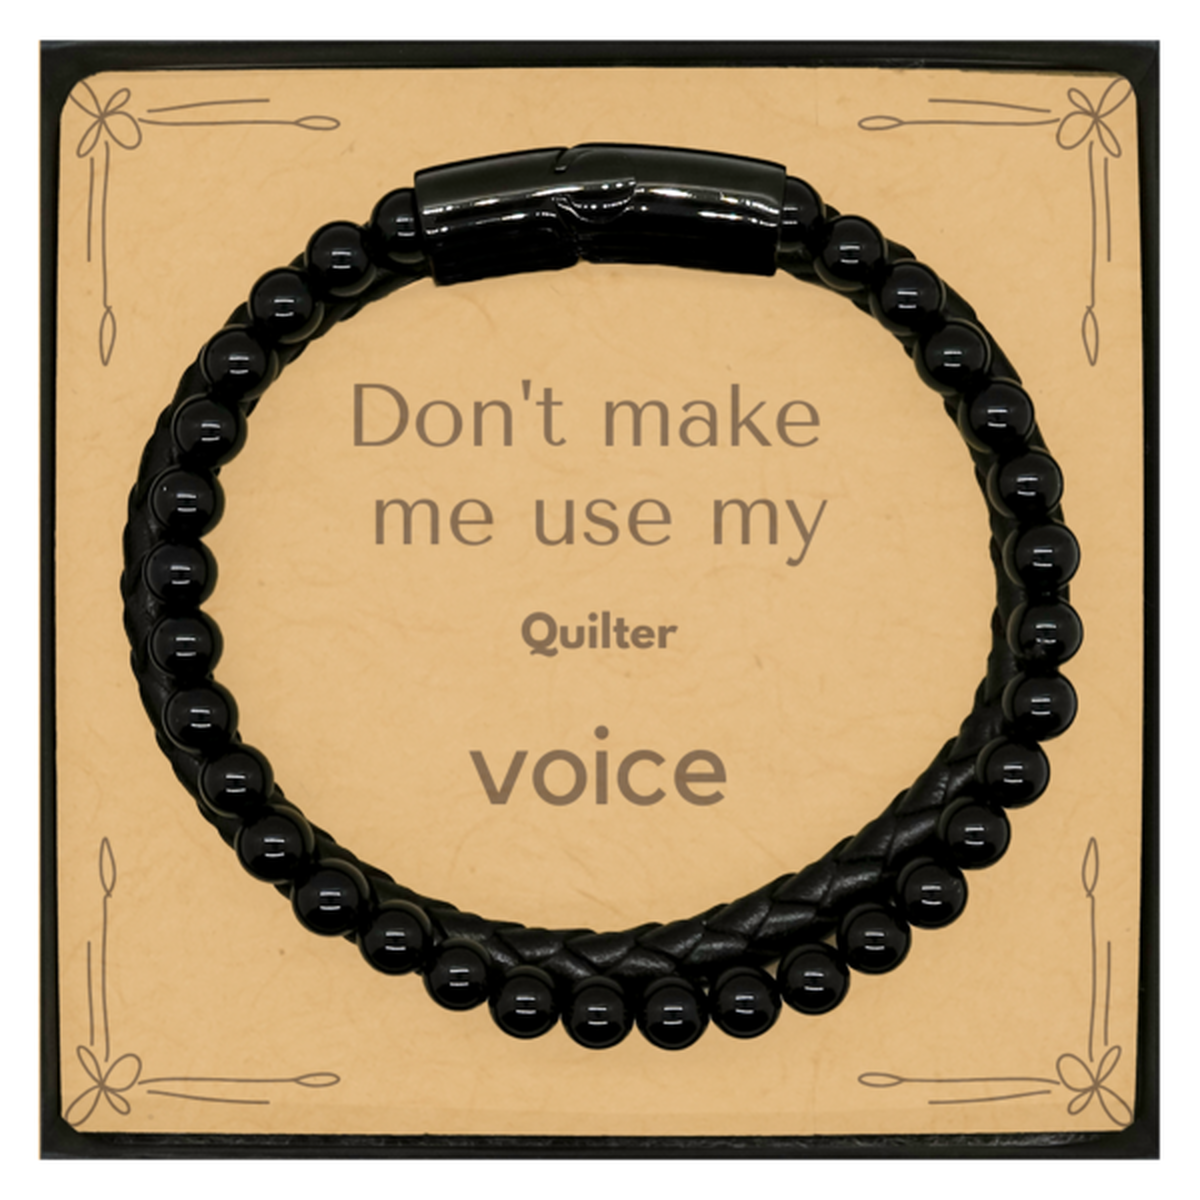 Don't make me use my Quilter voice, Sarcasm Quilter Card Gifts, Christmas Quilter Stone Leather Bracelets Birthday Unique Gifts For Quilter Coworkers, Men, Women, Colleague, Friends